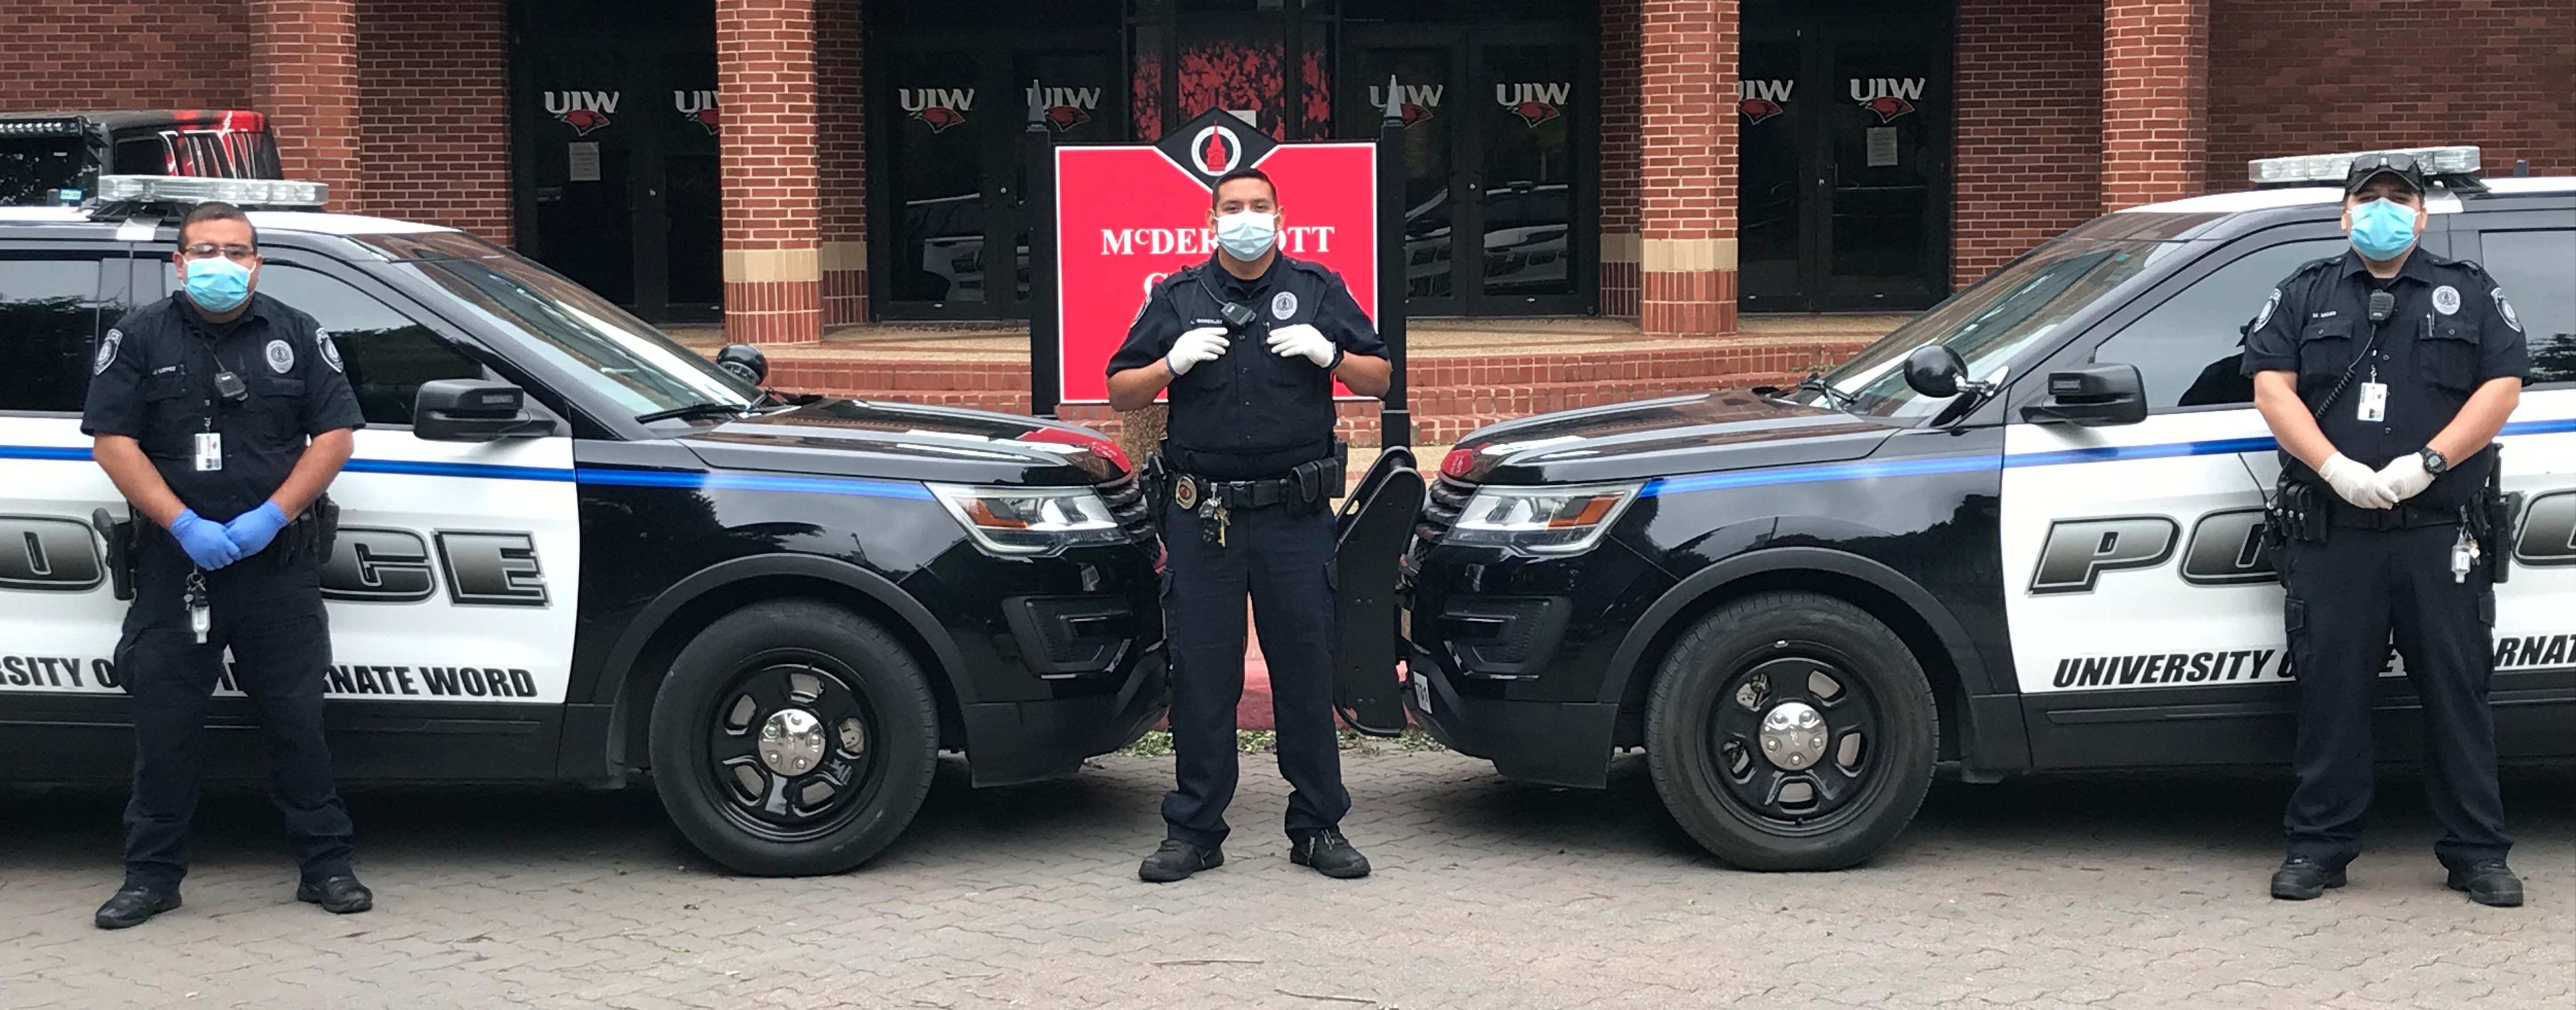 UIW police officers pose for a photo (while social distancing) wearing face masks in front of their vehicles